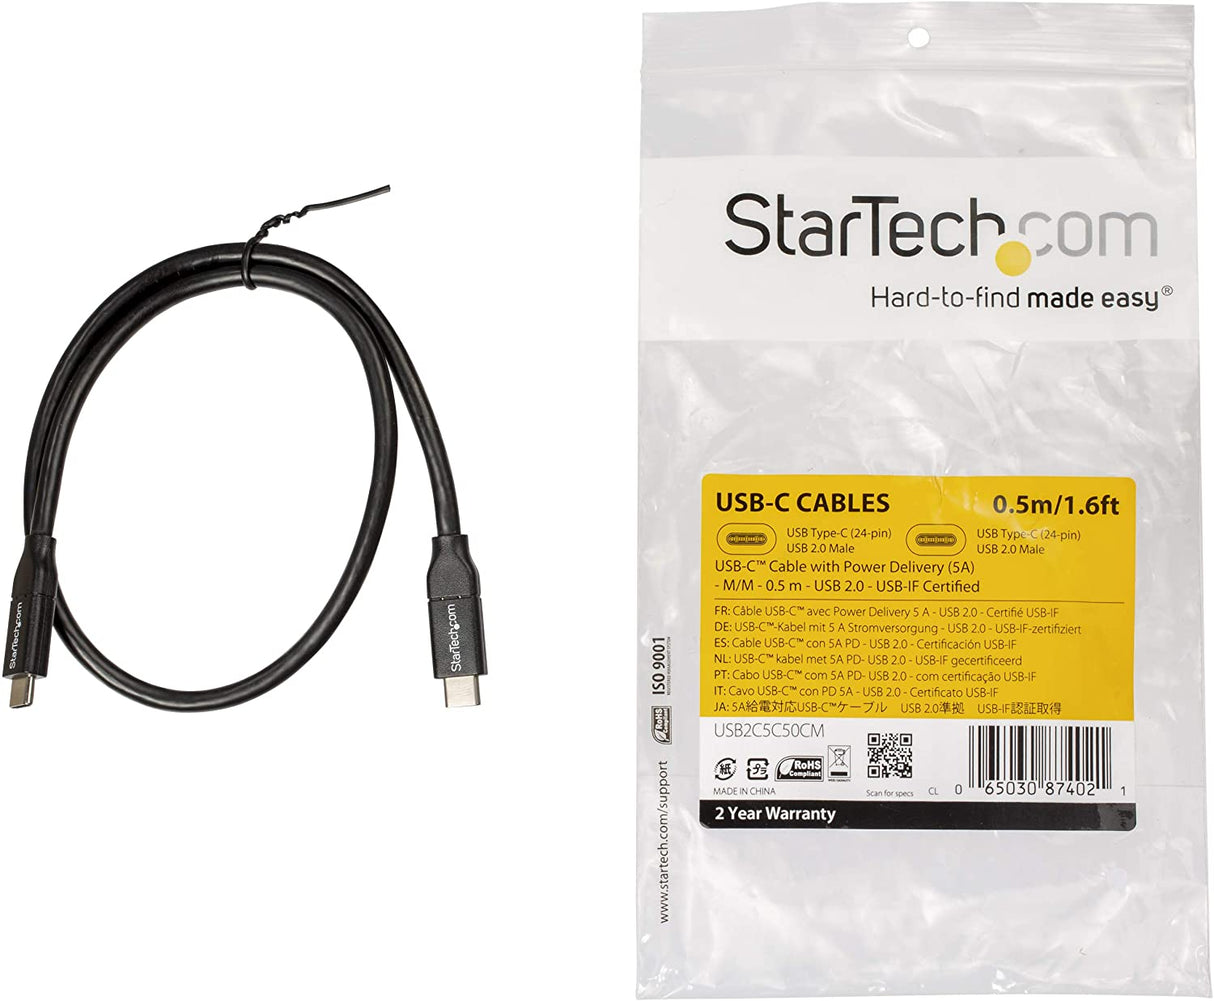 StarTech.com USB C to USB C Cable - 1.5 ft / 0.5m - 5A PD - White - USB 2.0 - USB-IF Certified - USB Type C Cable - USB C Charging Cable (USB2C5C50CM) Black 1.5 ft/ 0.5 m